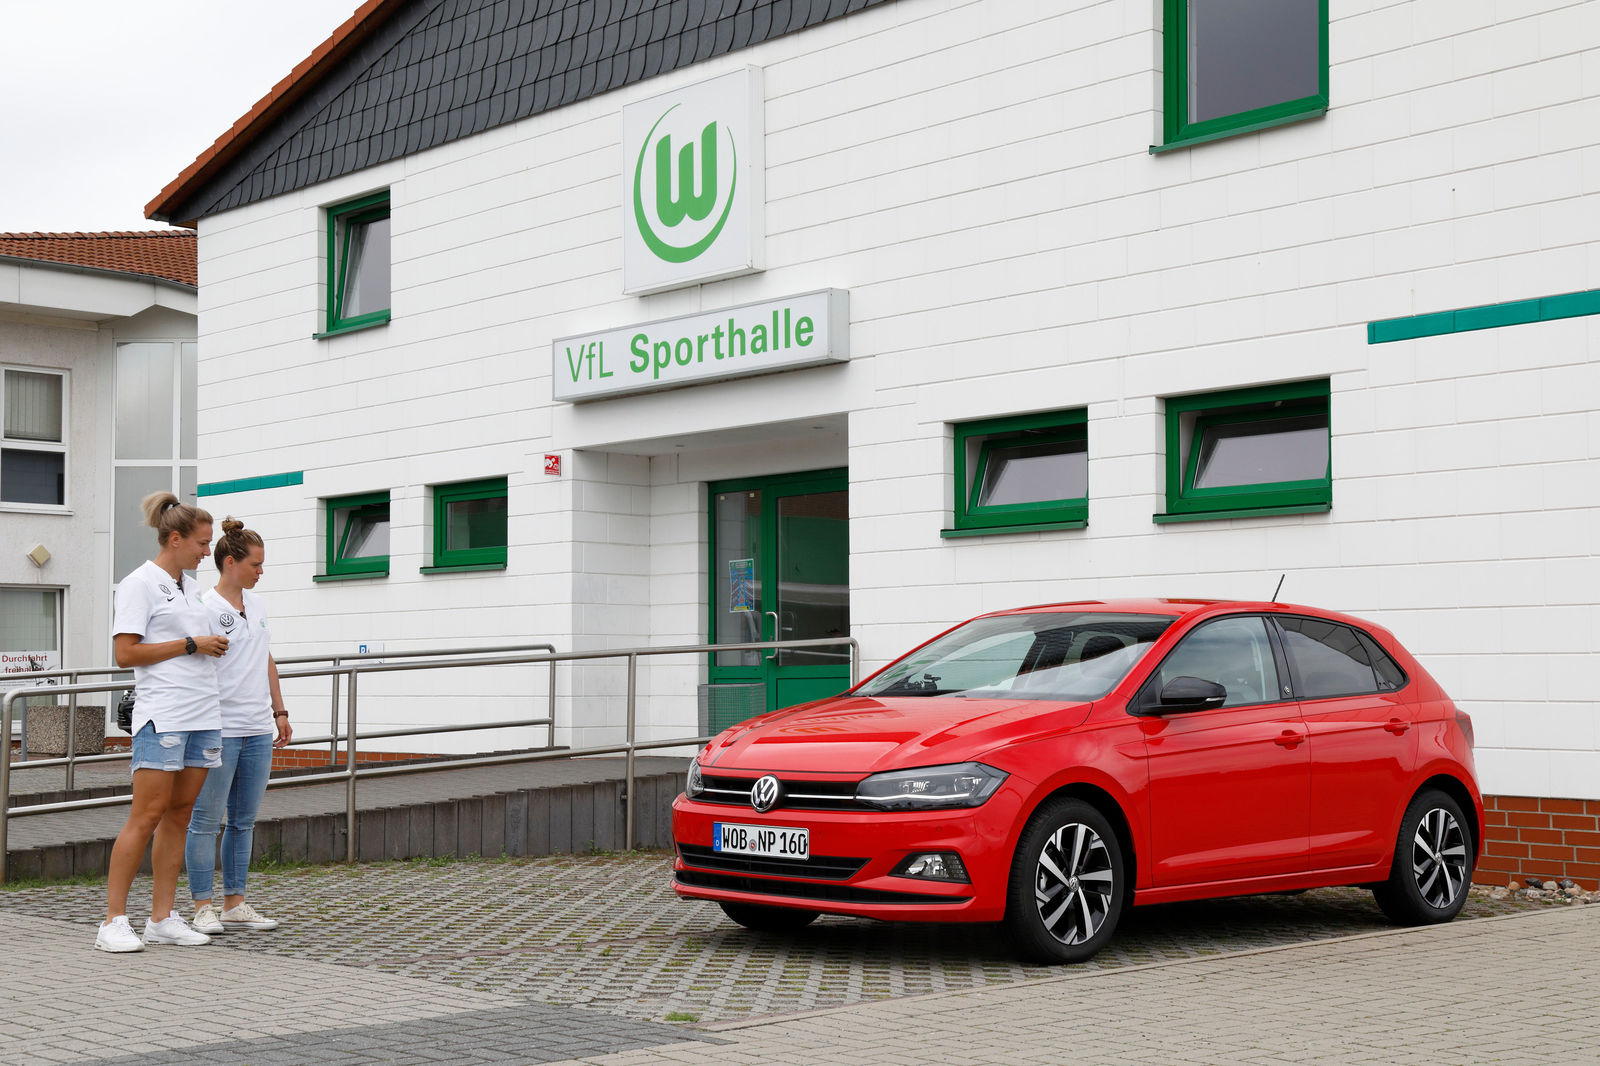 "Wolfsburg is ahead of Munich" – Sightseeing with Katharina Baunach and the new Polo